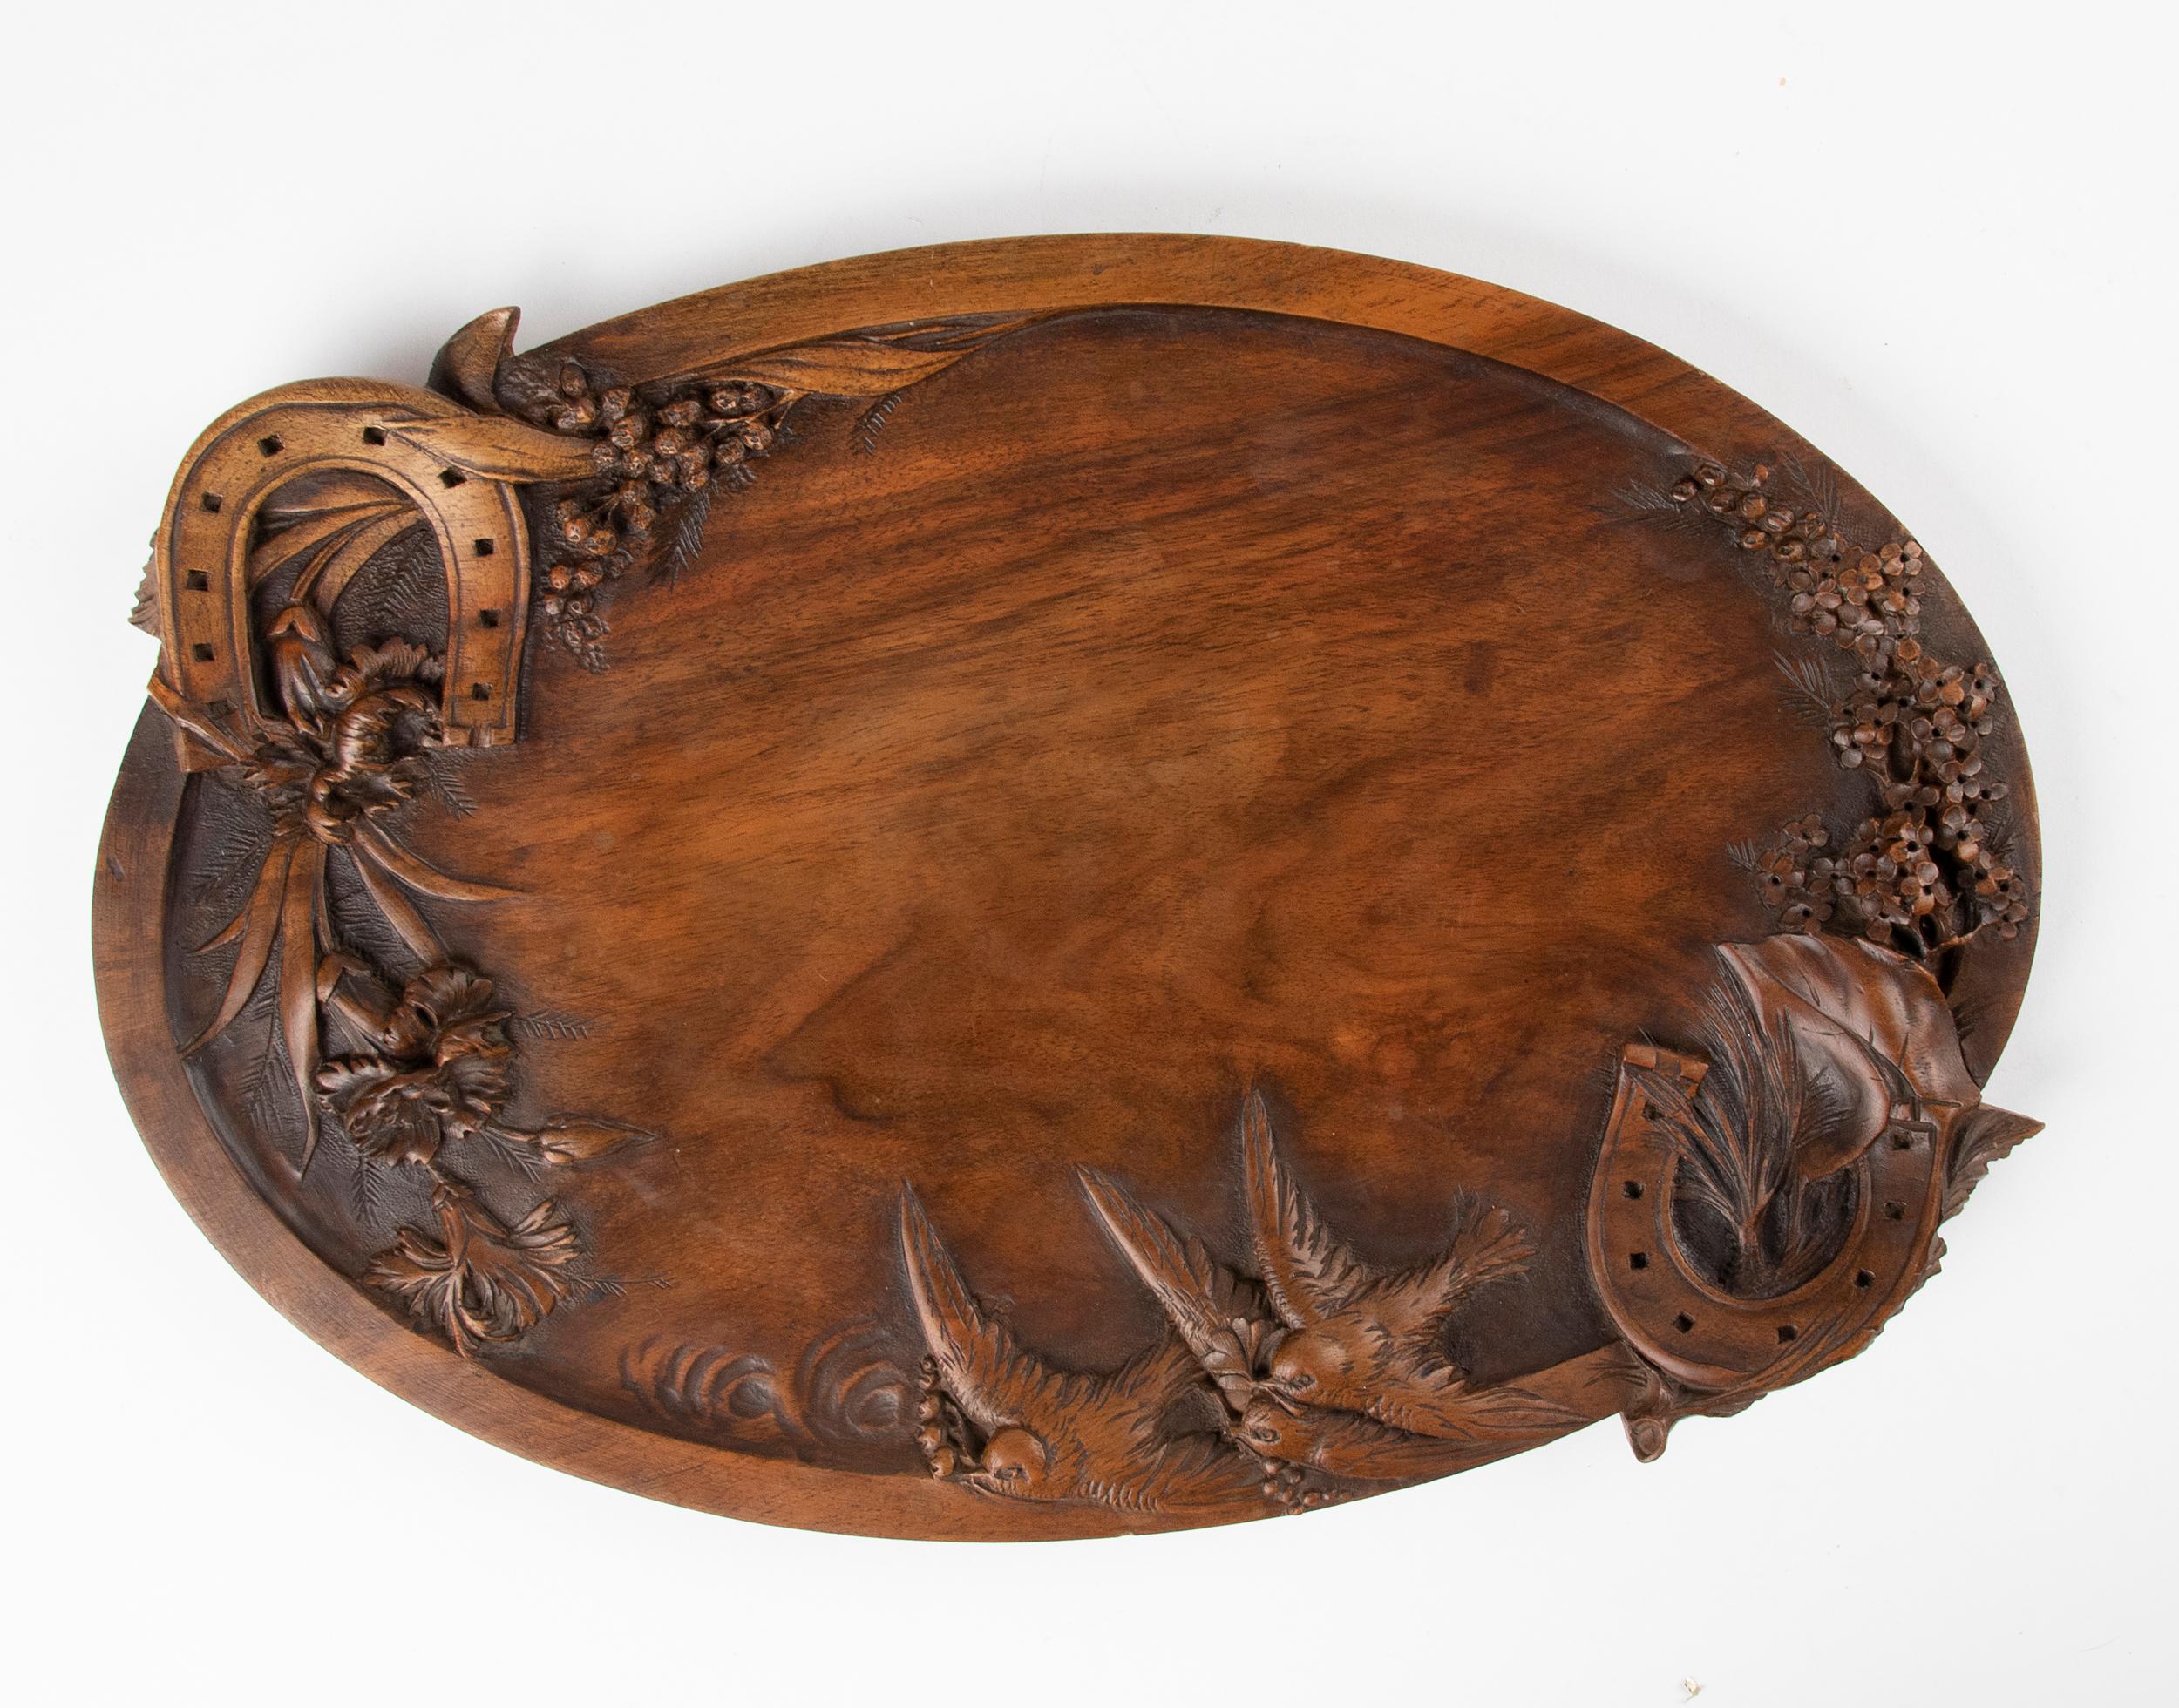 Beautiful antique tray with beautifully detailed carvings. The theme is so sweet, with the horseshoes symbolizing good luck and the swallows symbolizing love and freedom. This theme is common in French arts at the end of the 19th century. The wood